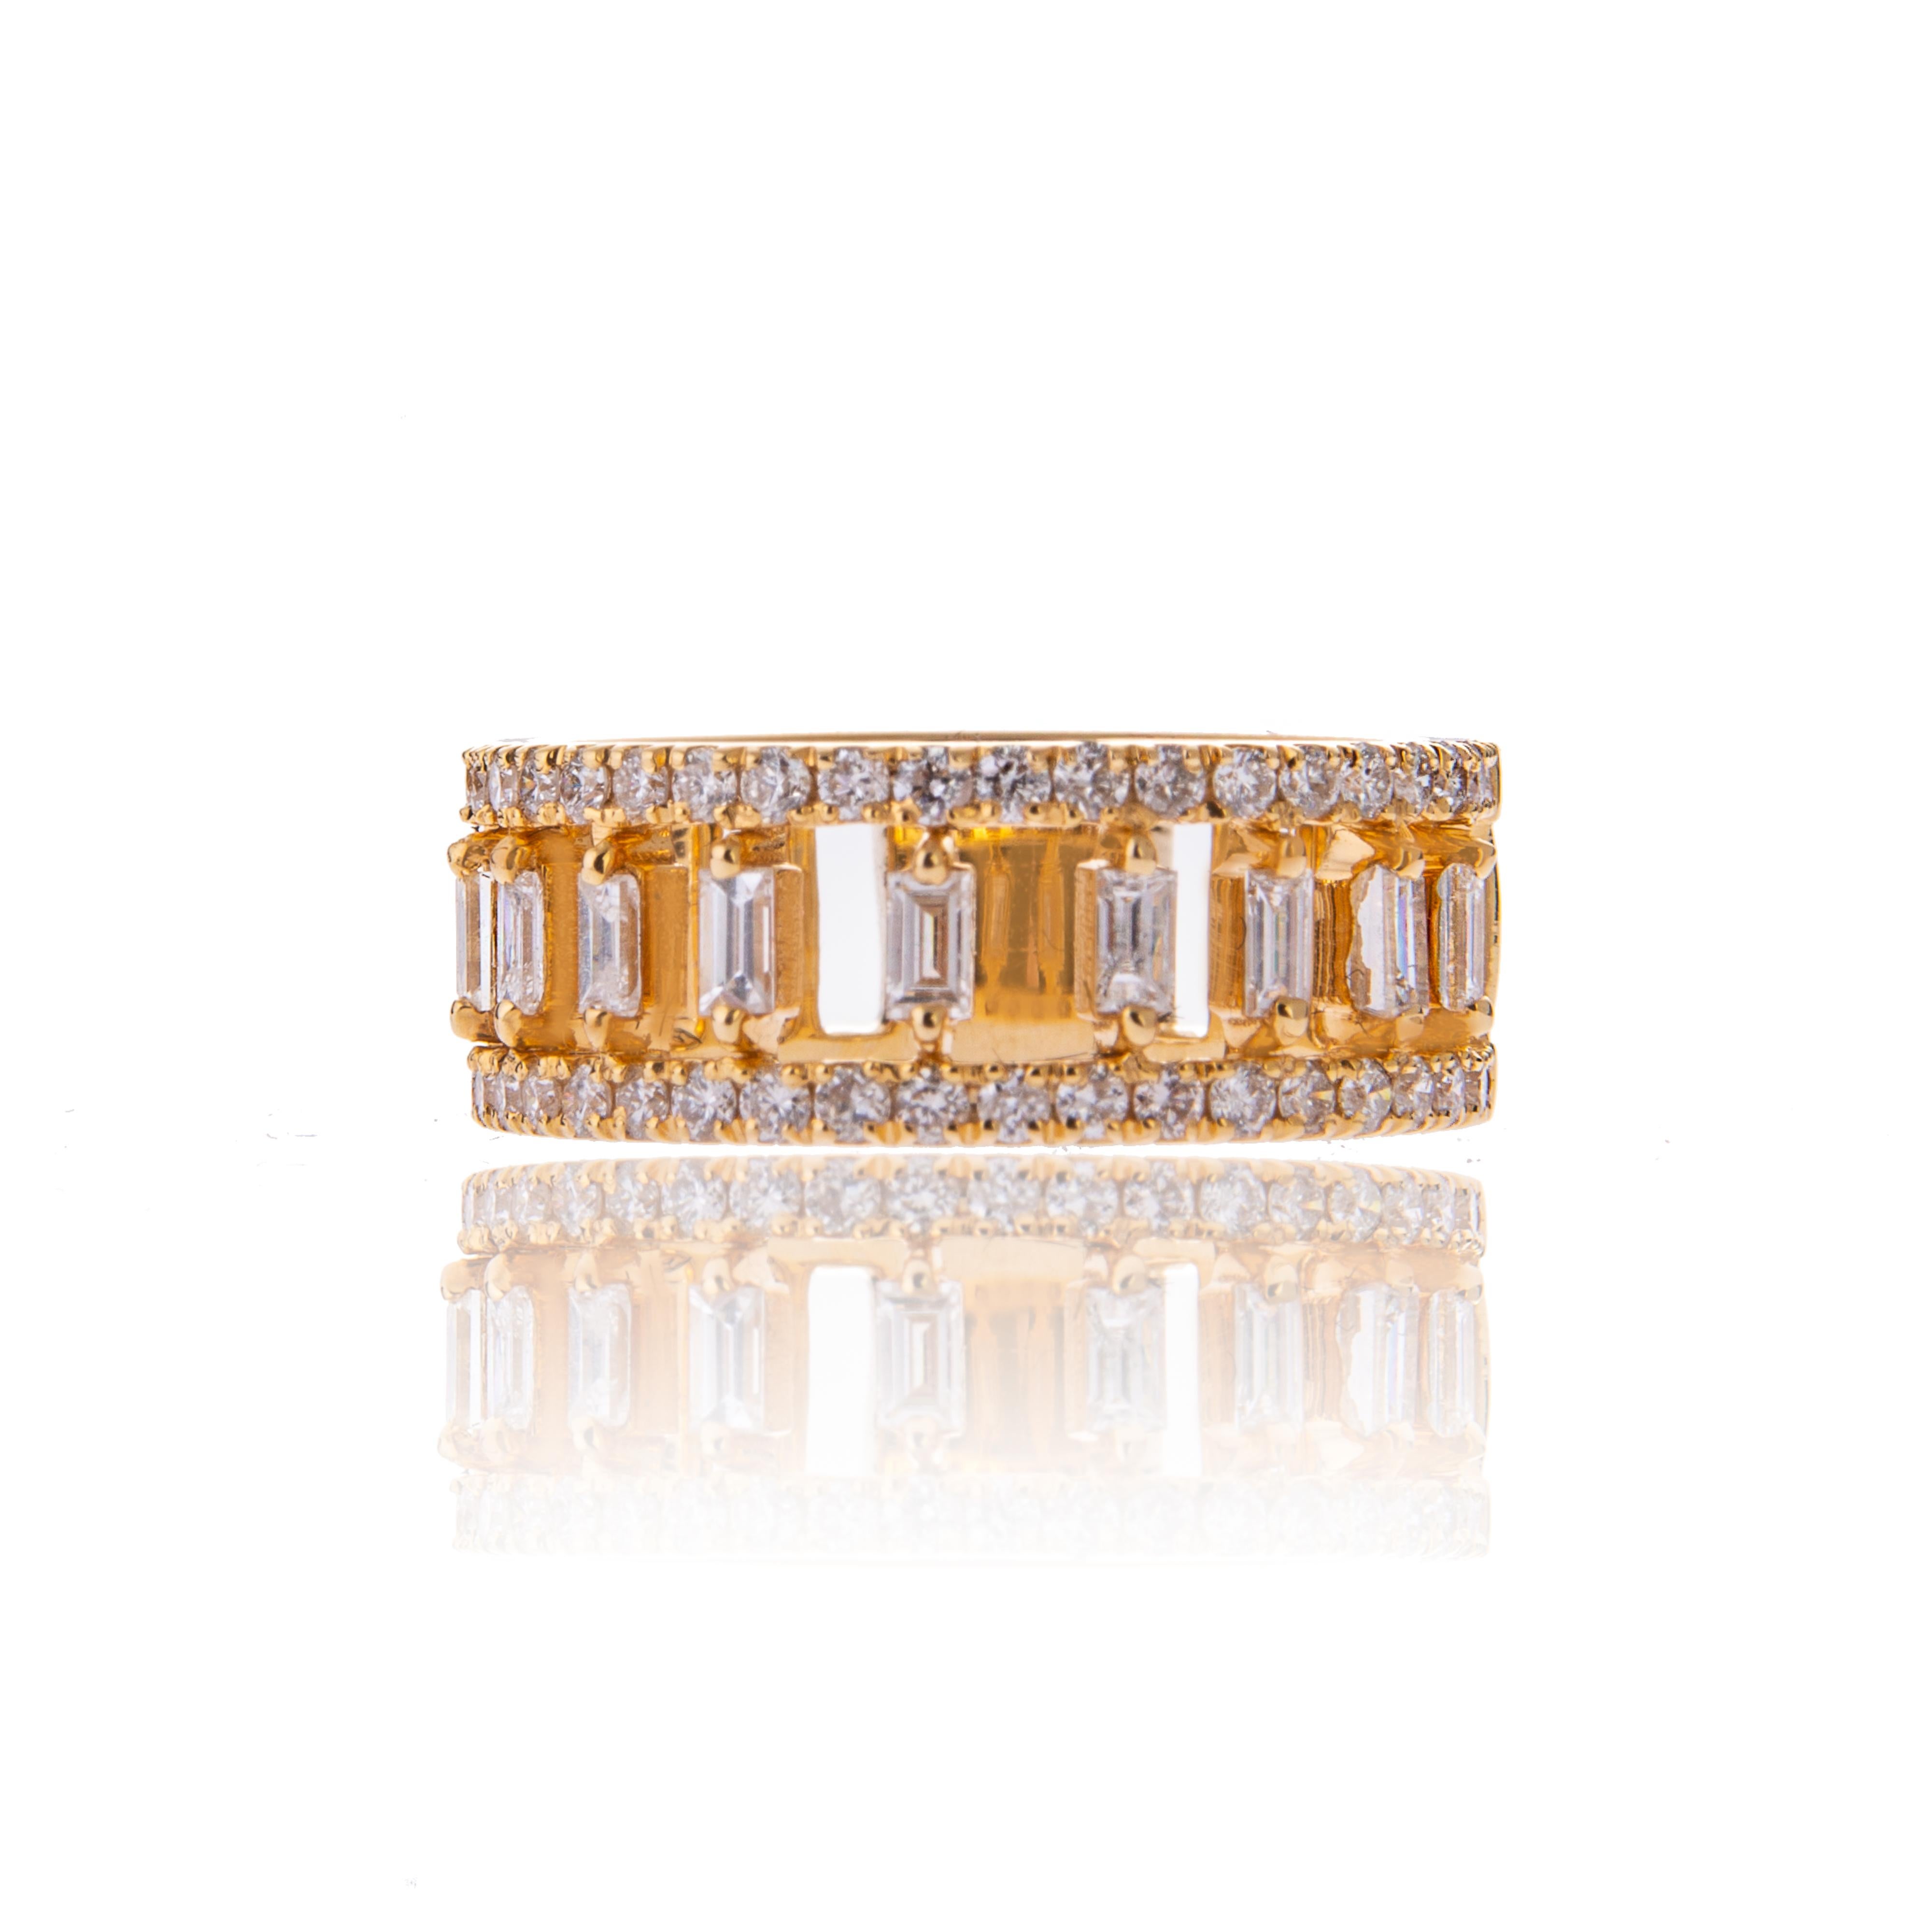 A classic diamond ring  surrounded by round and baguette sparkling diamonds set in 18ct yellow gold

Diamond: 0.75ct

Colour and Clarity: F SI

Metal Purity: 18ct yellow gold

British Hallmarked
This ring is currently availlable in size H UK  but